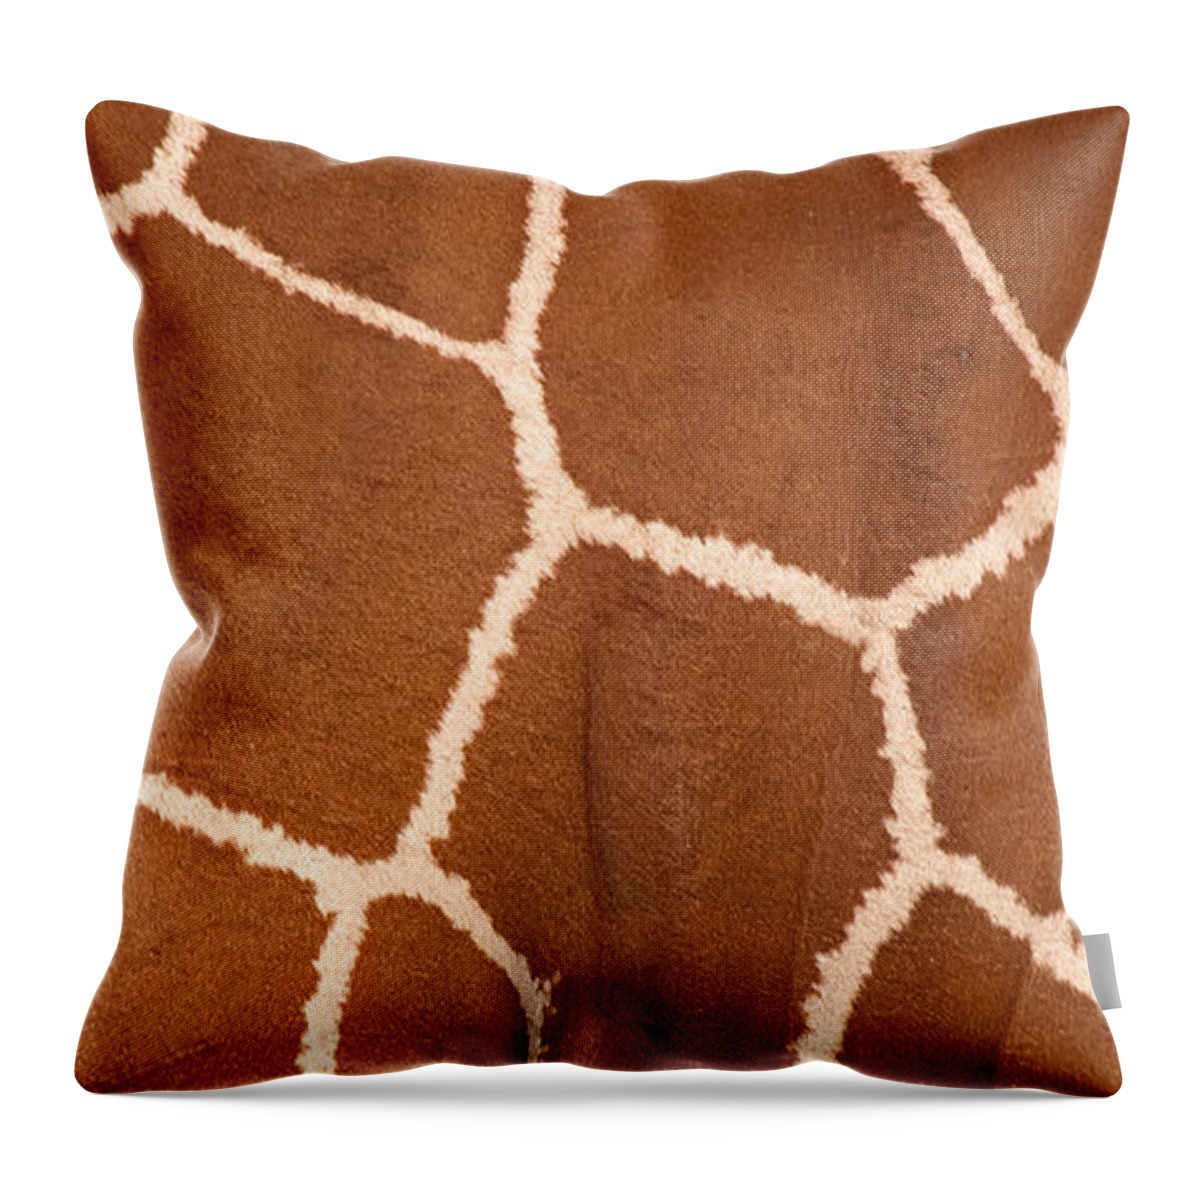 Photography Throw Pillow featuring the photograph Close-up Of A Reticulated Giraffe by Panoramic Images